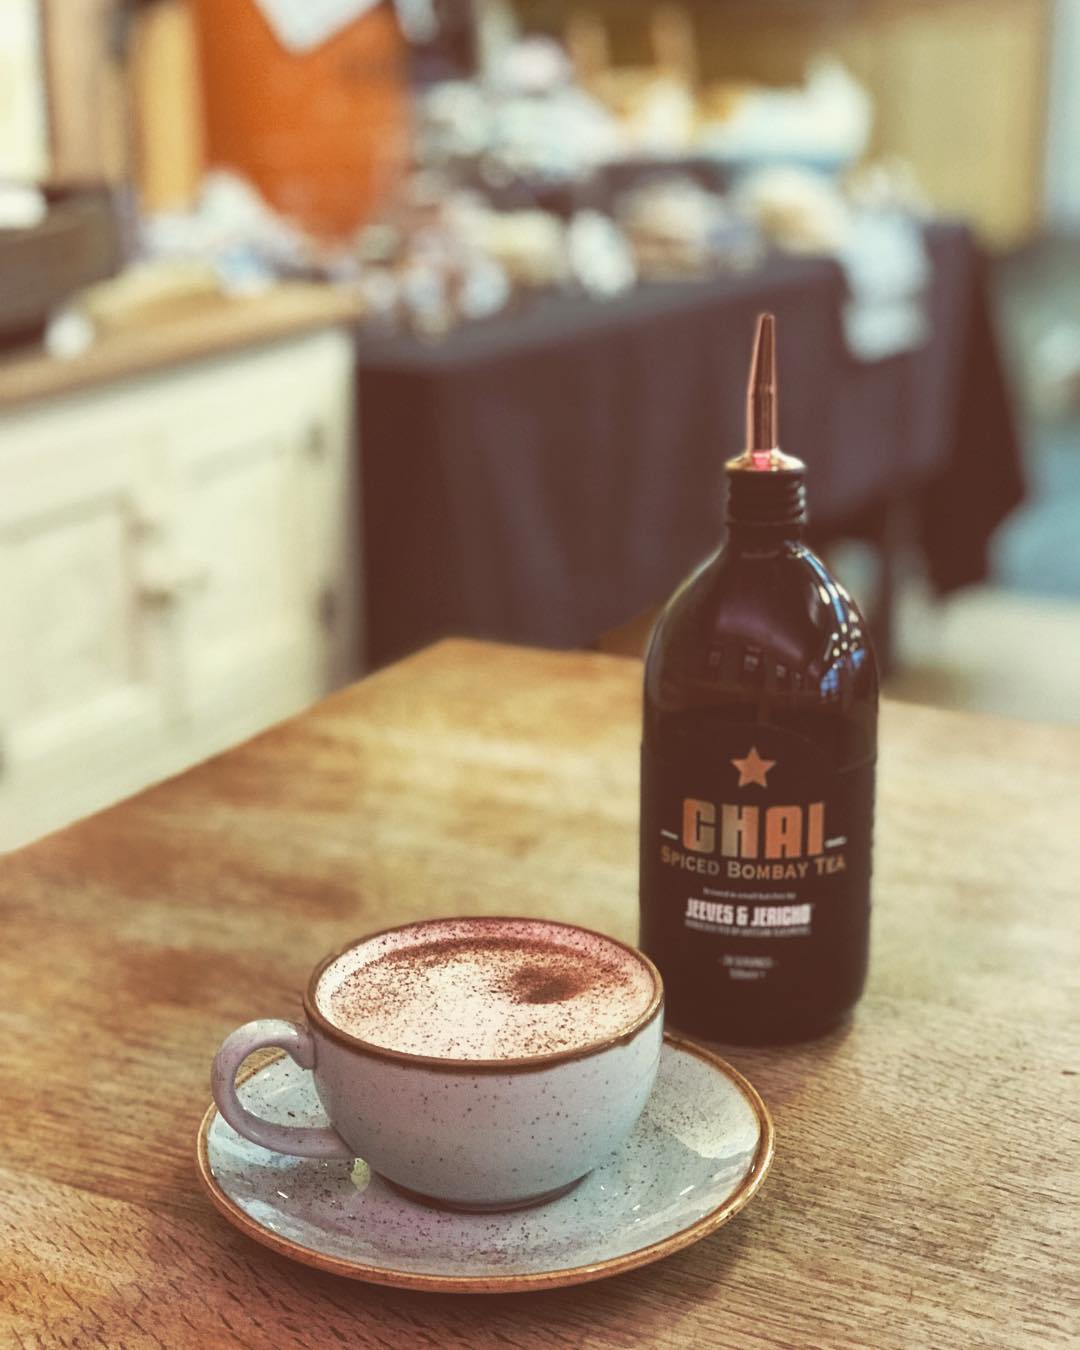 Introducing @jeevesandjericho our brand spanking new Chai Latte! We think it’s AMAZING but we’ll let you be the judge of that.
.
.
#jeevesandjericho #chai #chailatte #northlakes #lakedistrict #cumbira #penrith #carlisle #thenorth #drinks #food #foodie #drink #coffee #barista #baristadaily